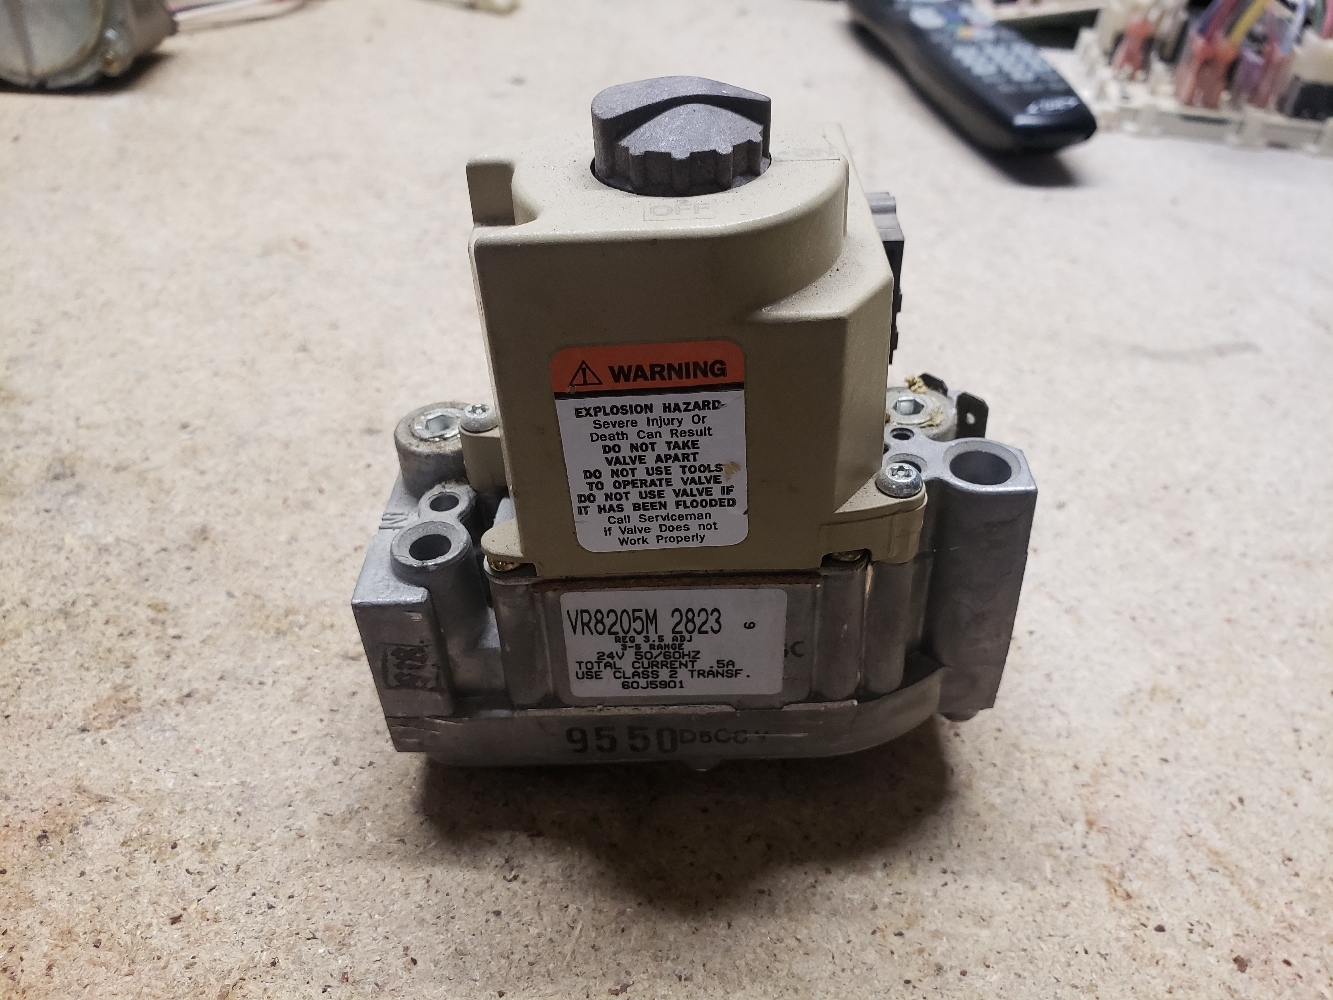 Primary image for Honeywell furnace gas valve VR8205M 2823 60J5901